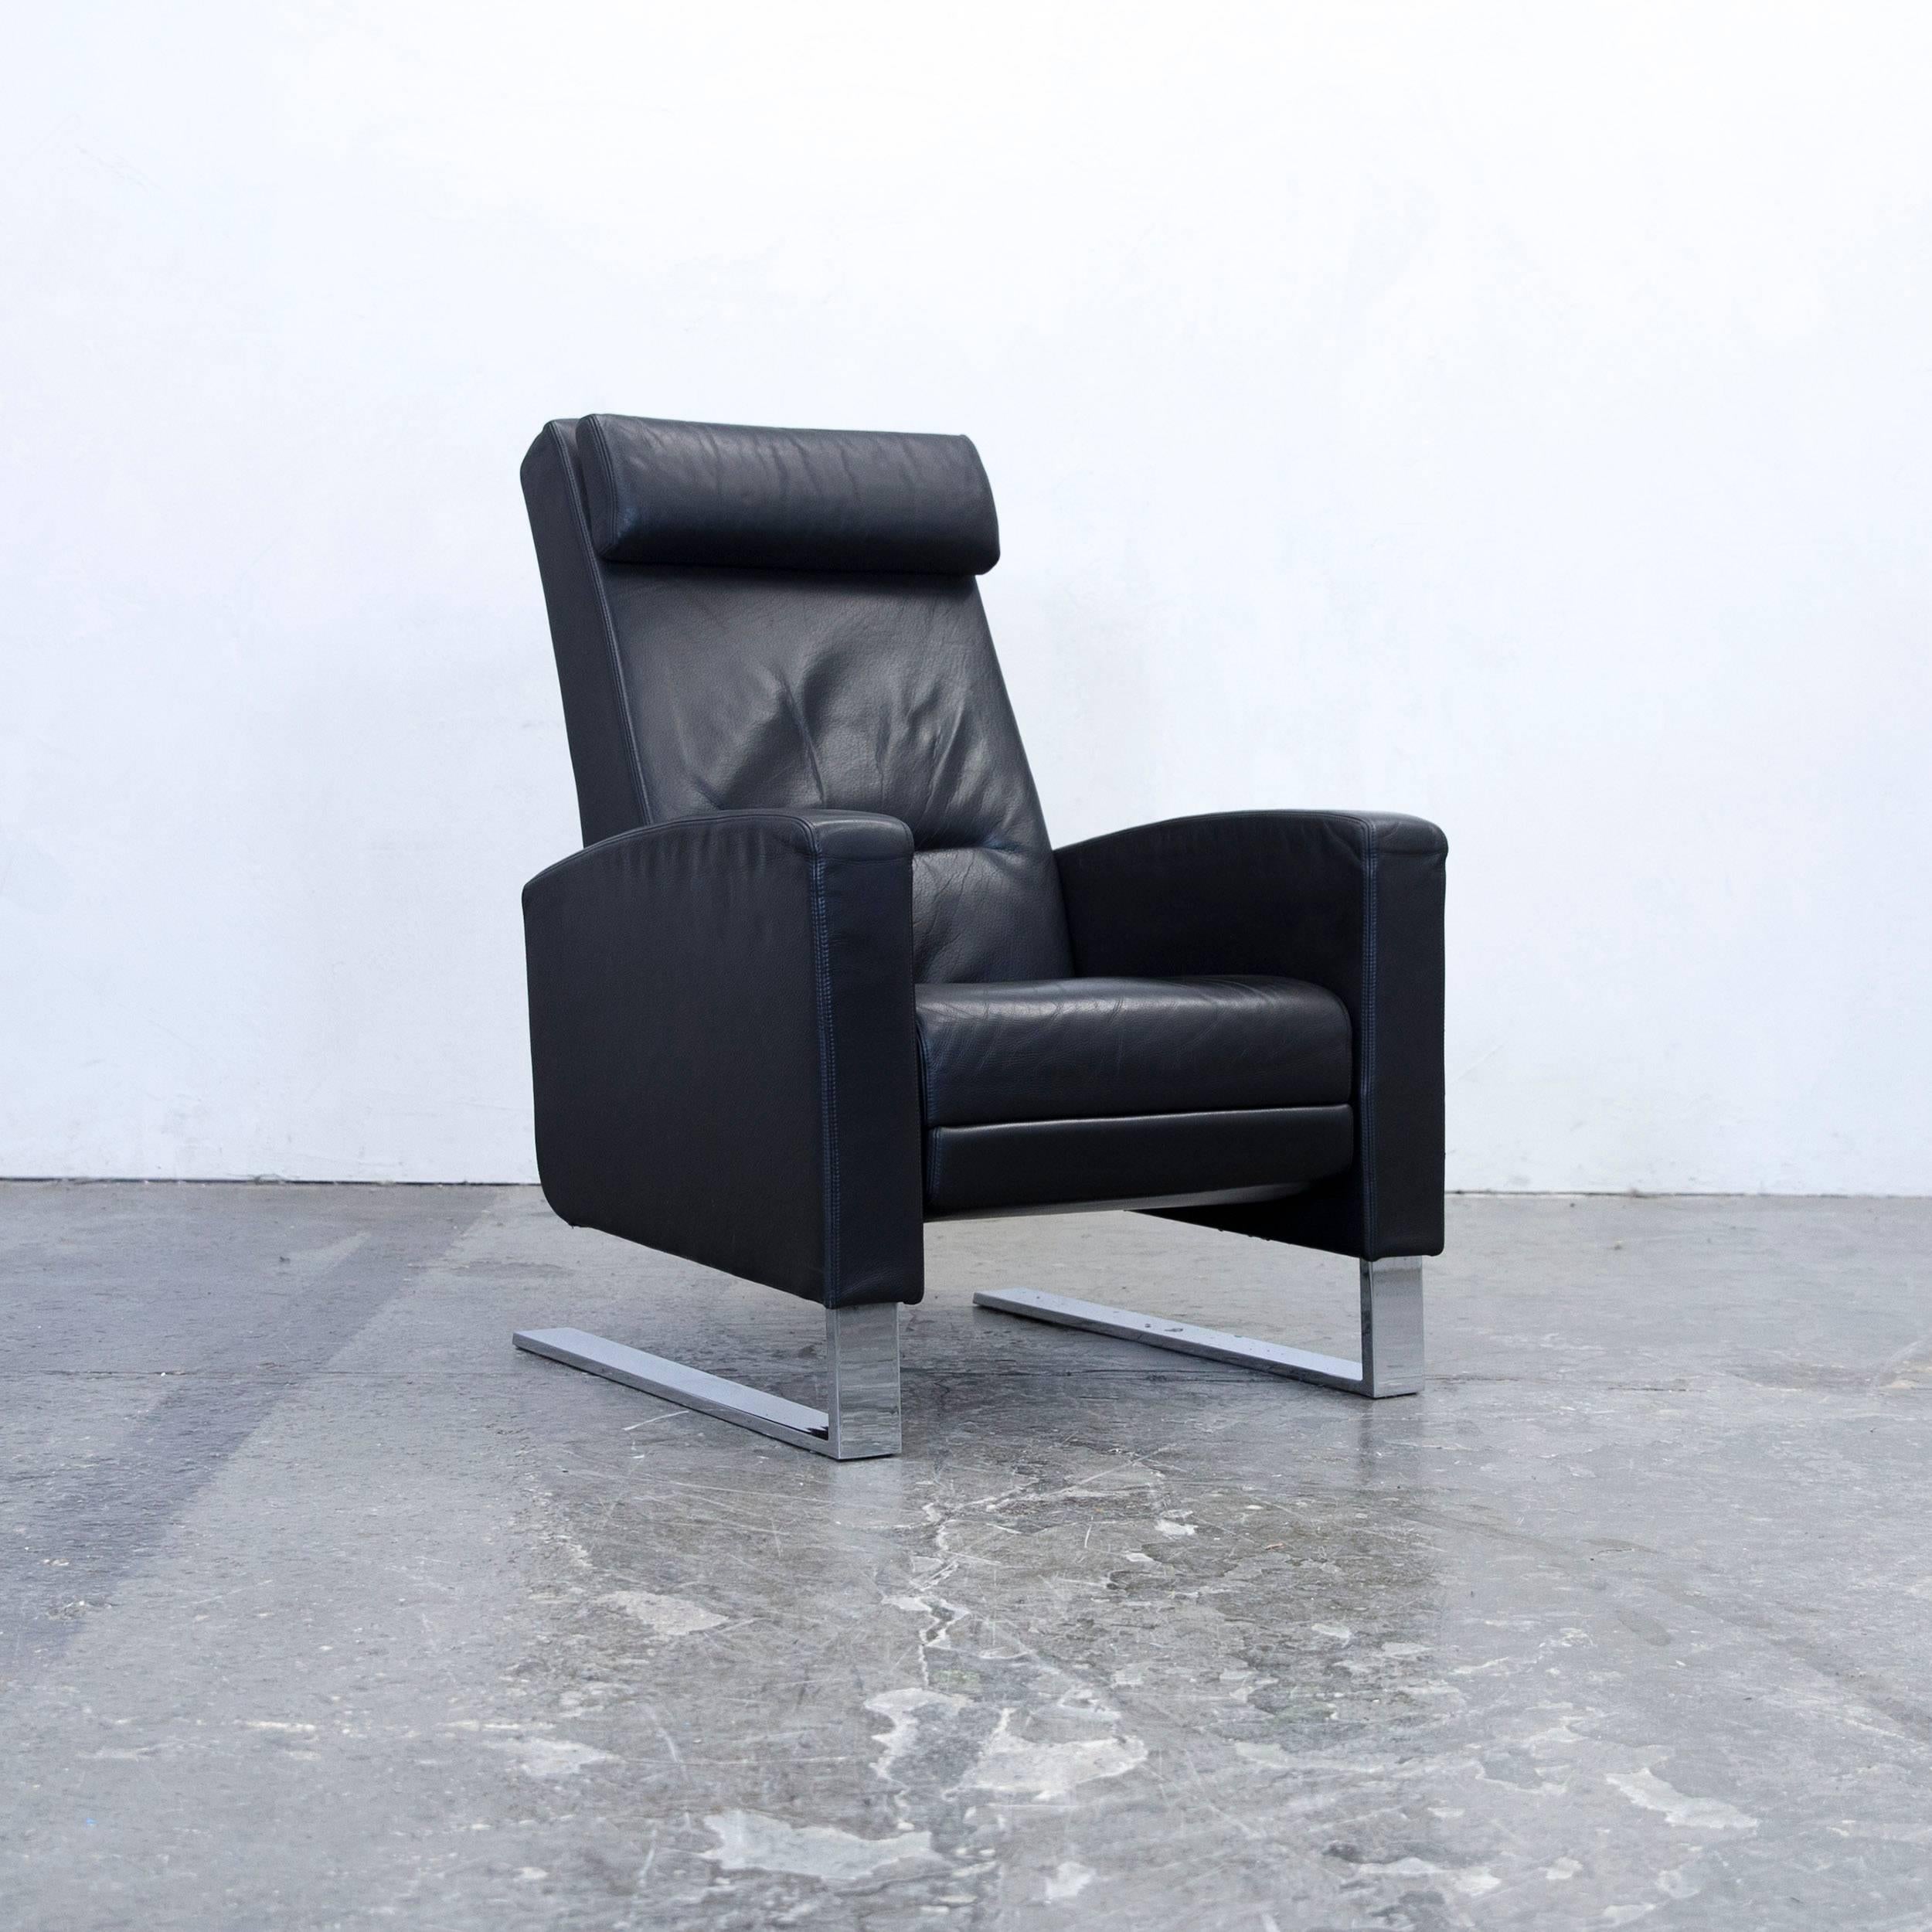 Black colored original Wittman Lindbergh by Kai Stania designer armchair, in a minimalistic and modern design, with convenient functions, made for pure comfort and flexibility.